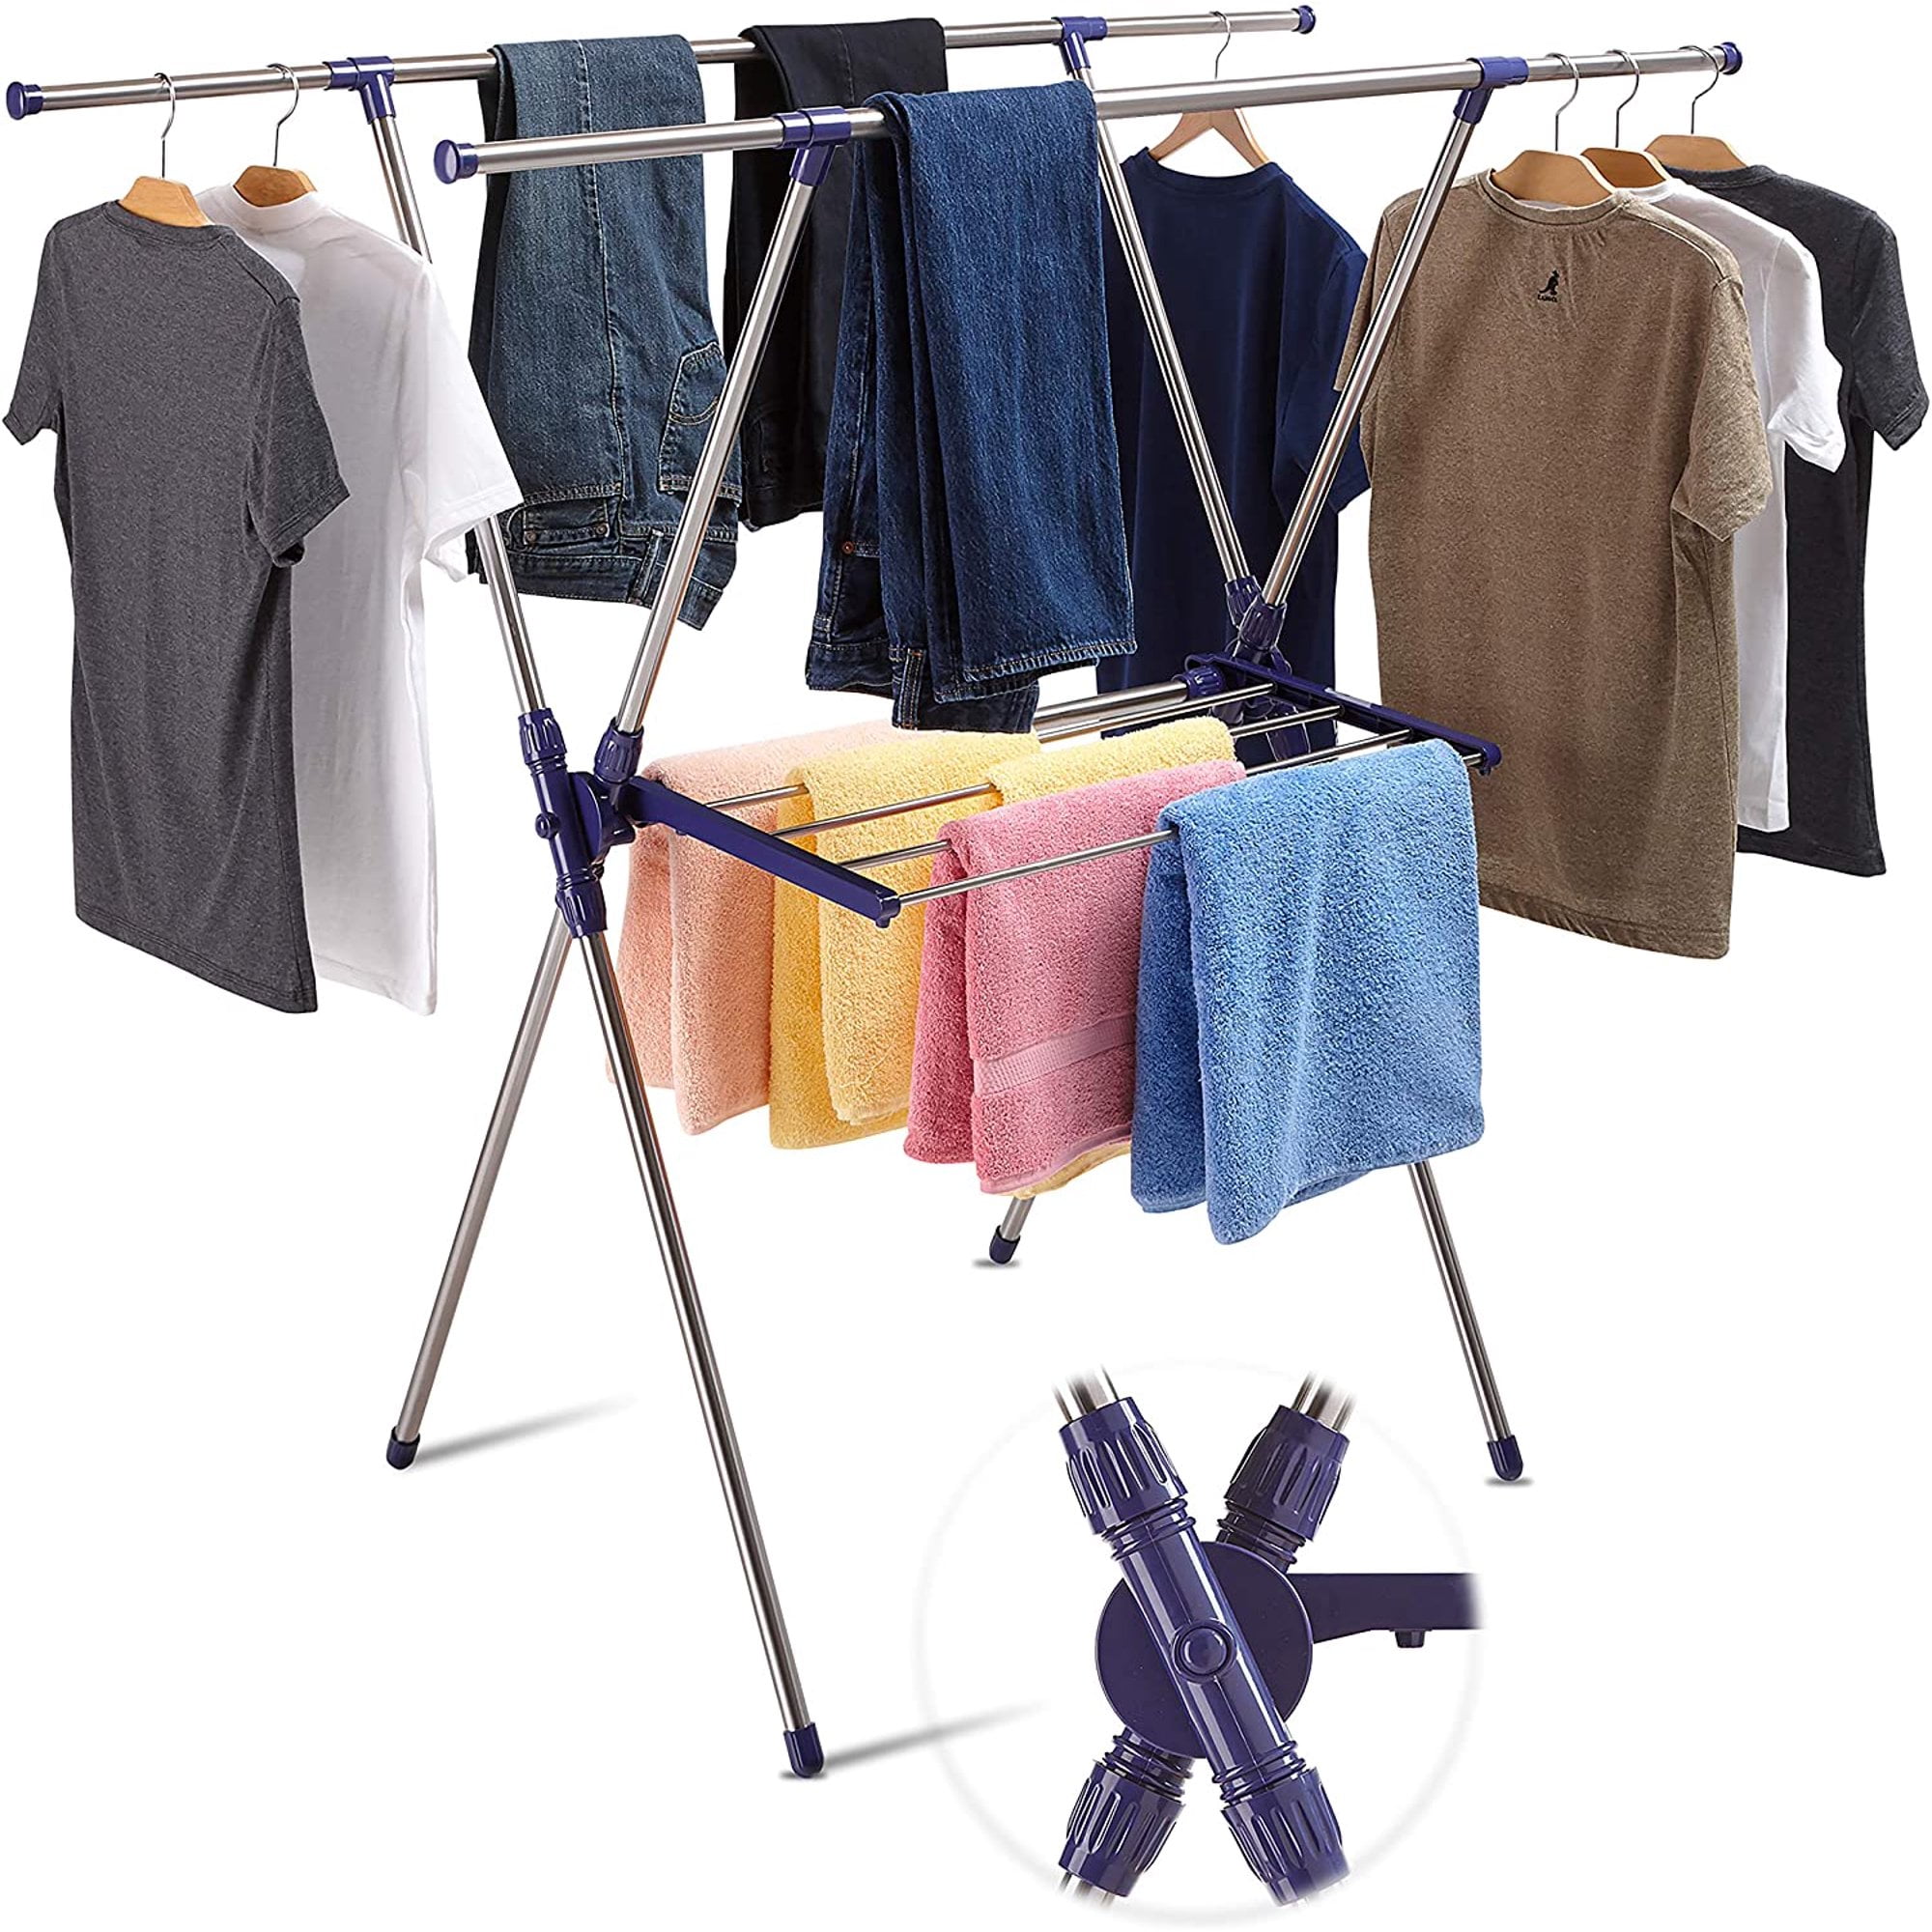 Indoor And Outdoor Folding Collapsible Clothes Drying Rack For Laundry Hanging 